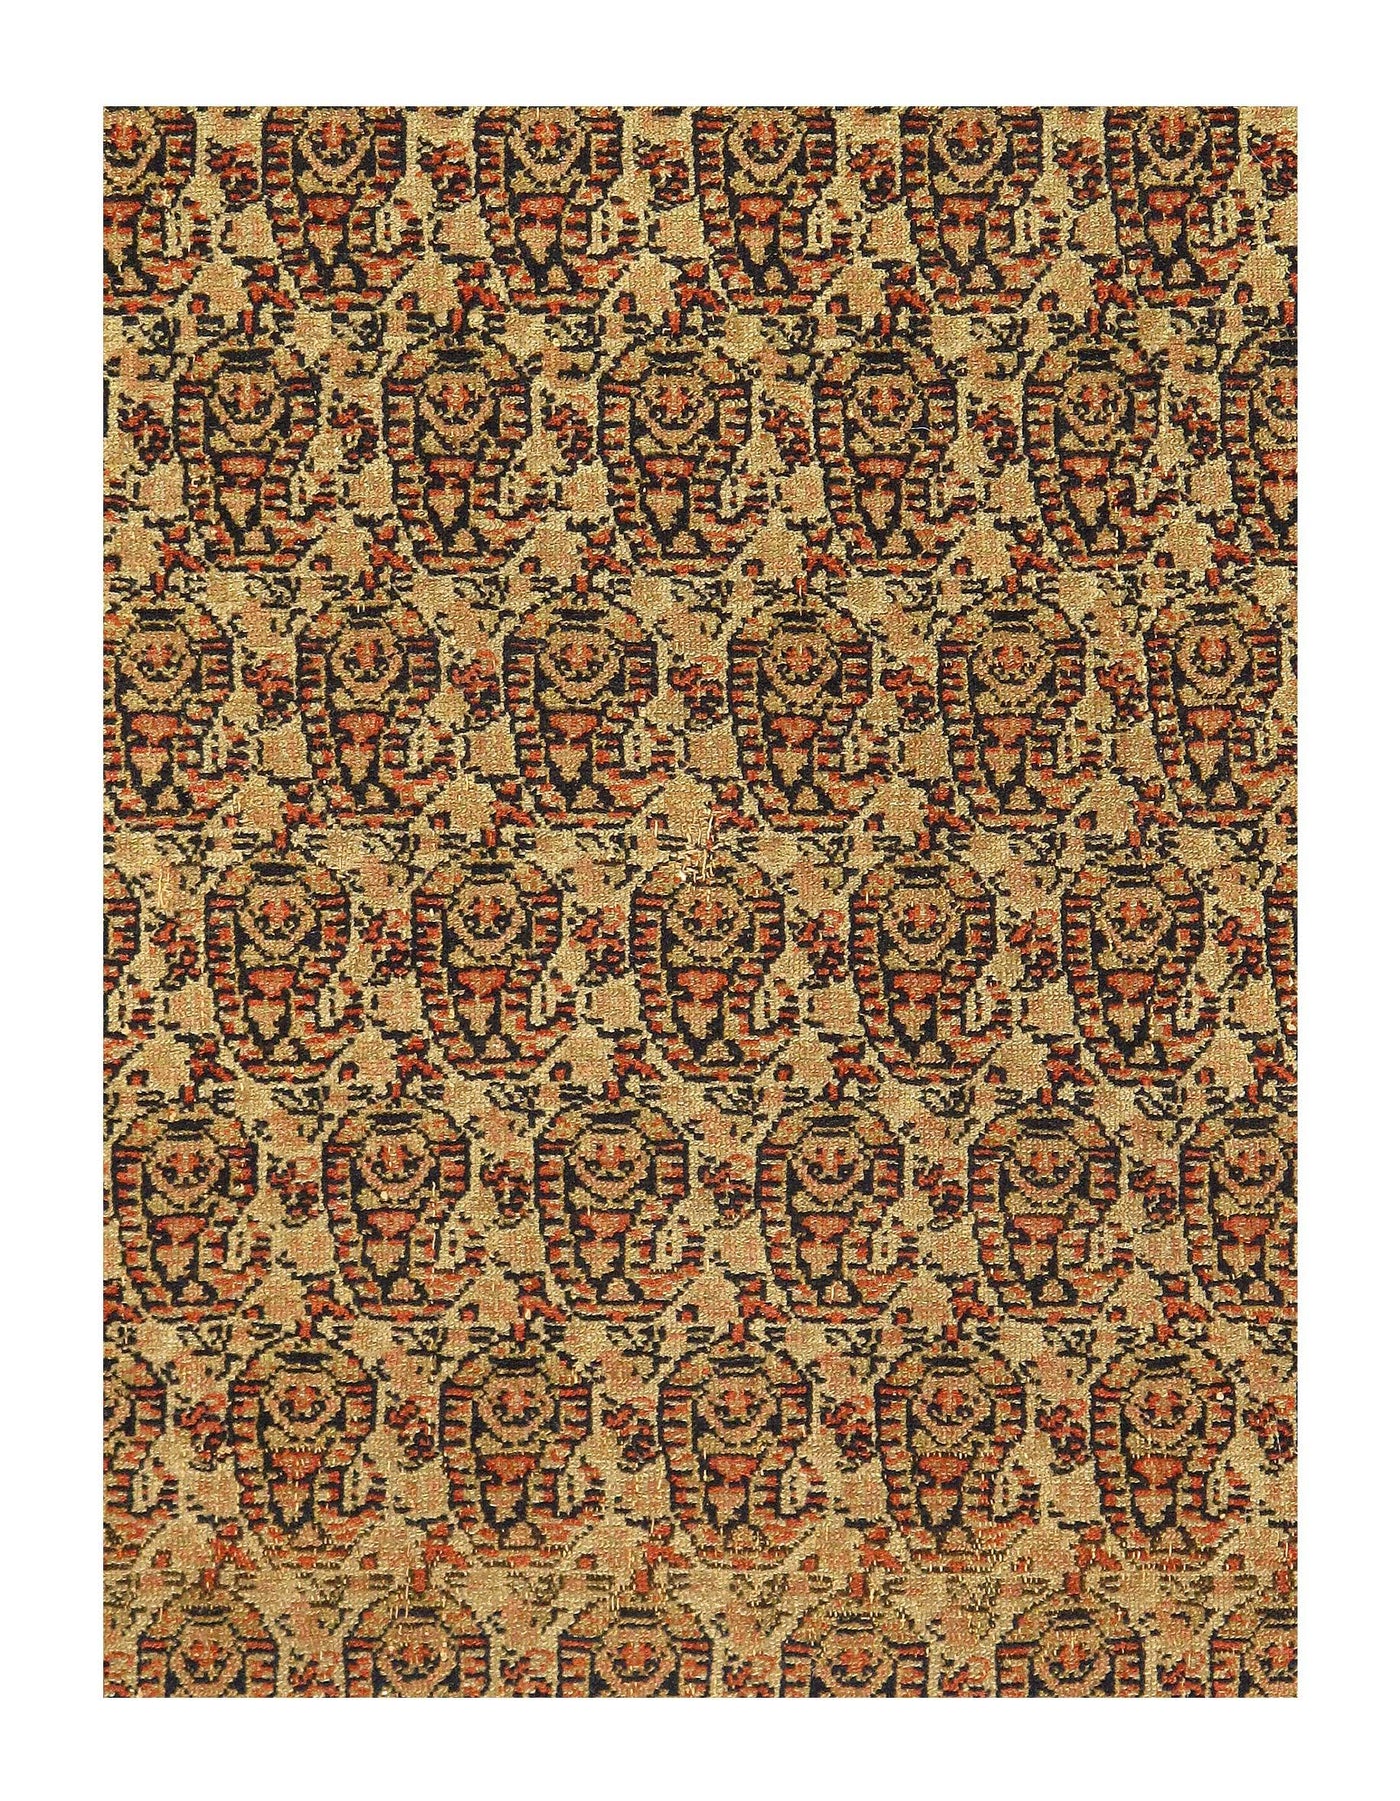 Canvello Hand-Knotted Antique Senna Rug - 4'6'' X 6'3''